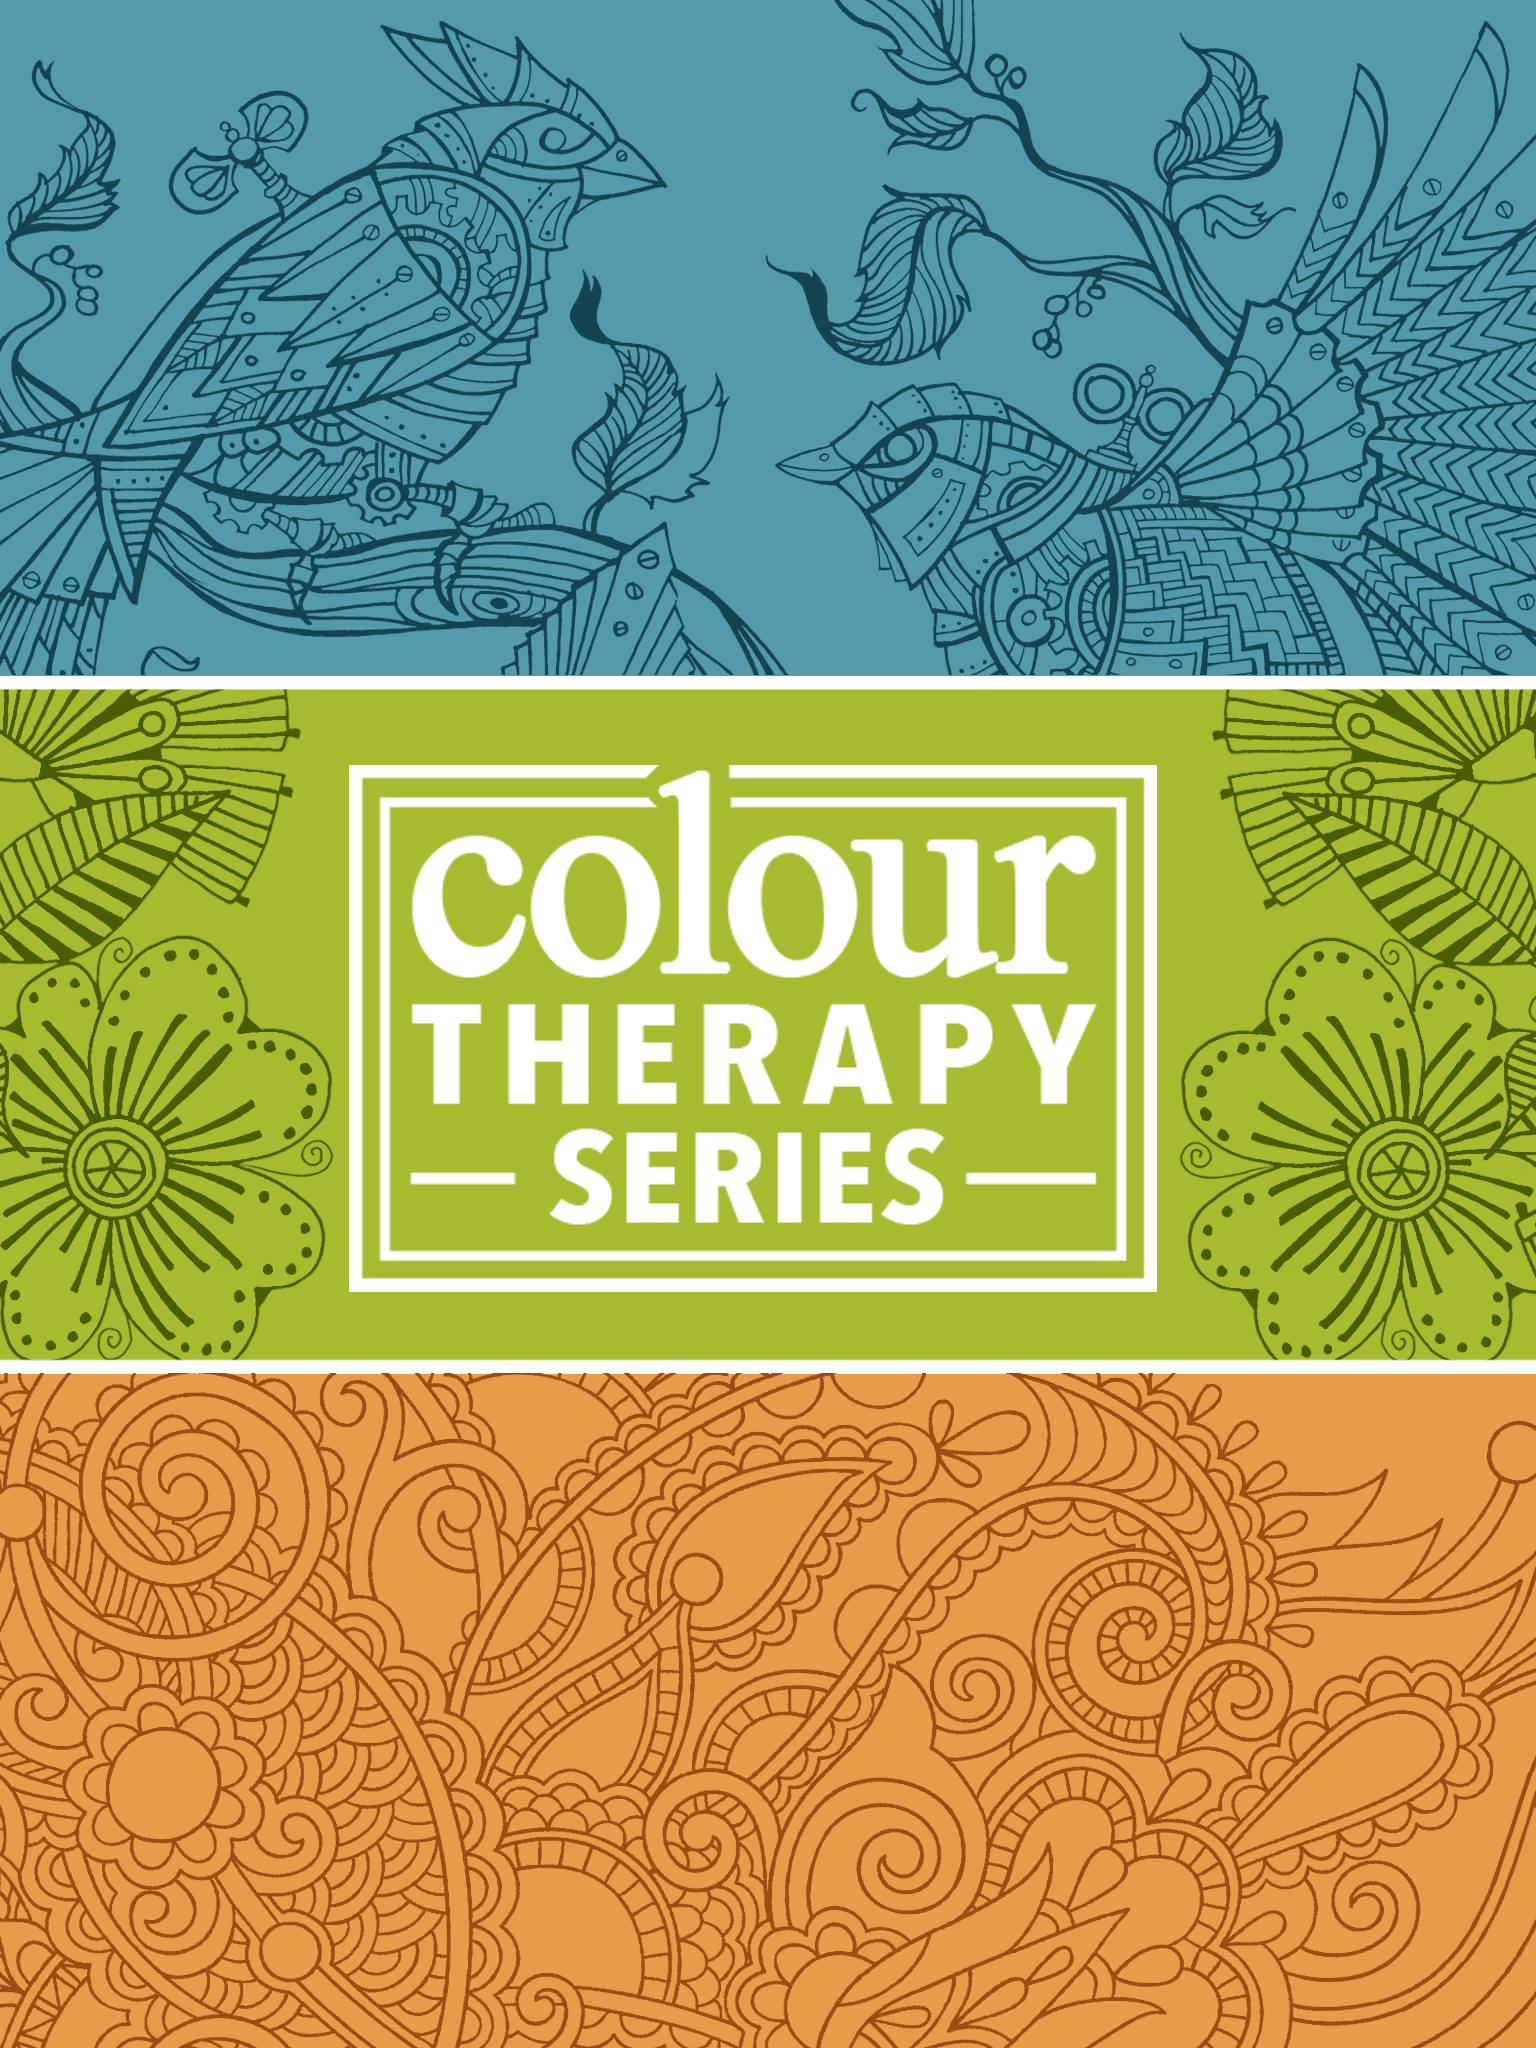 iTunes app for the Art Therapy adult colouring book series